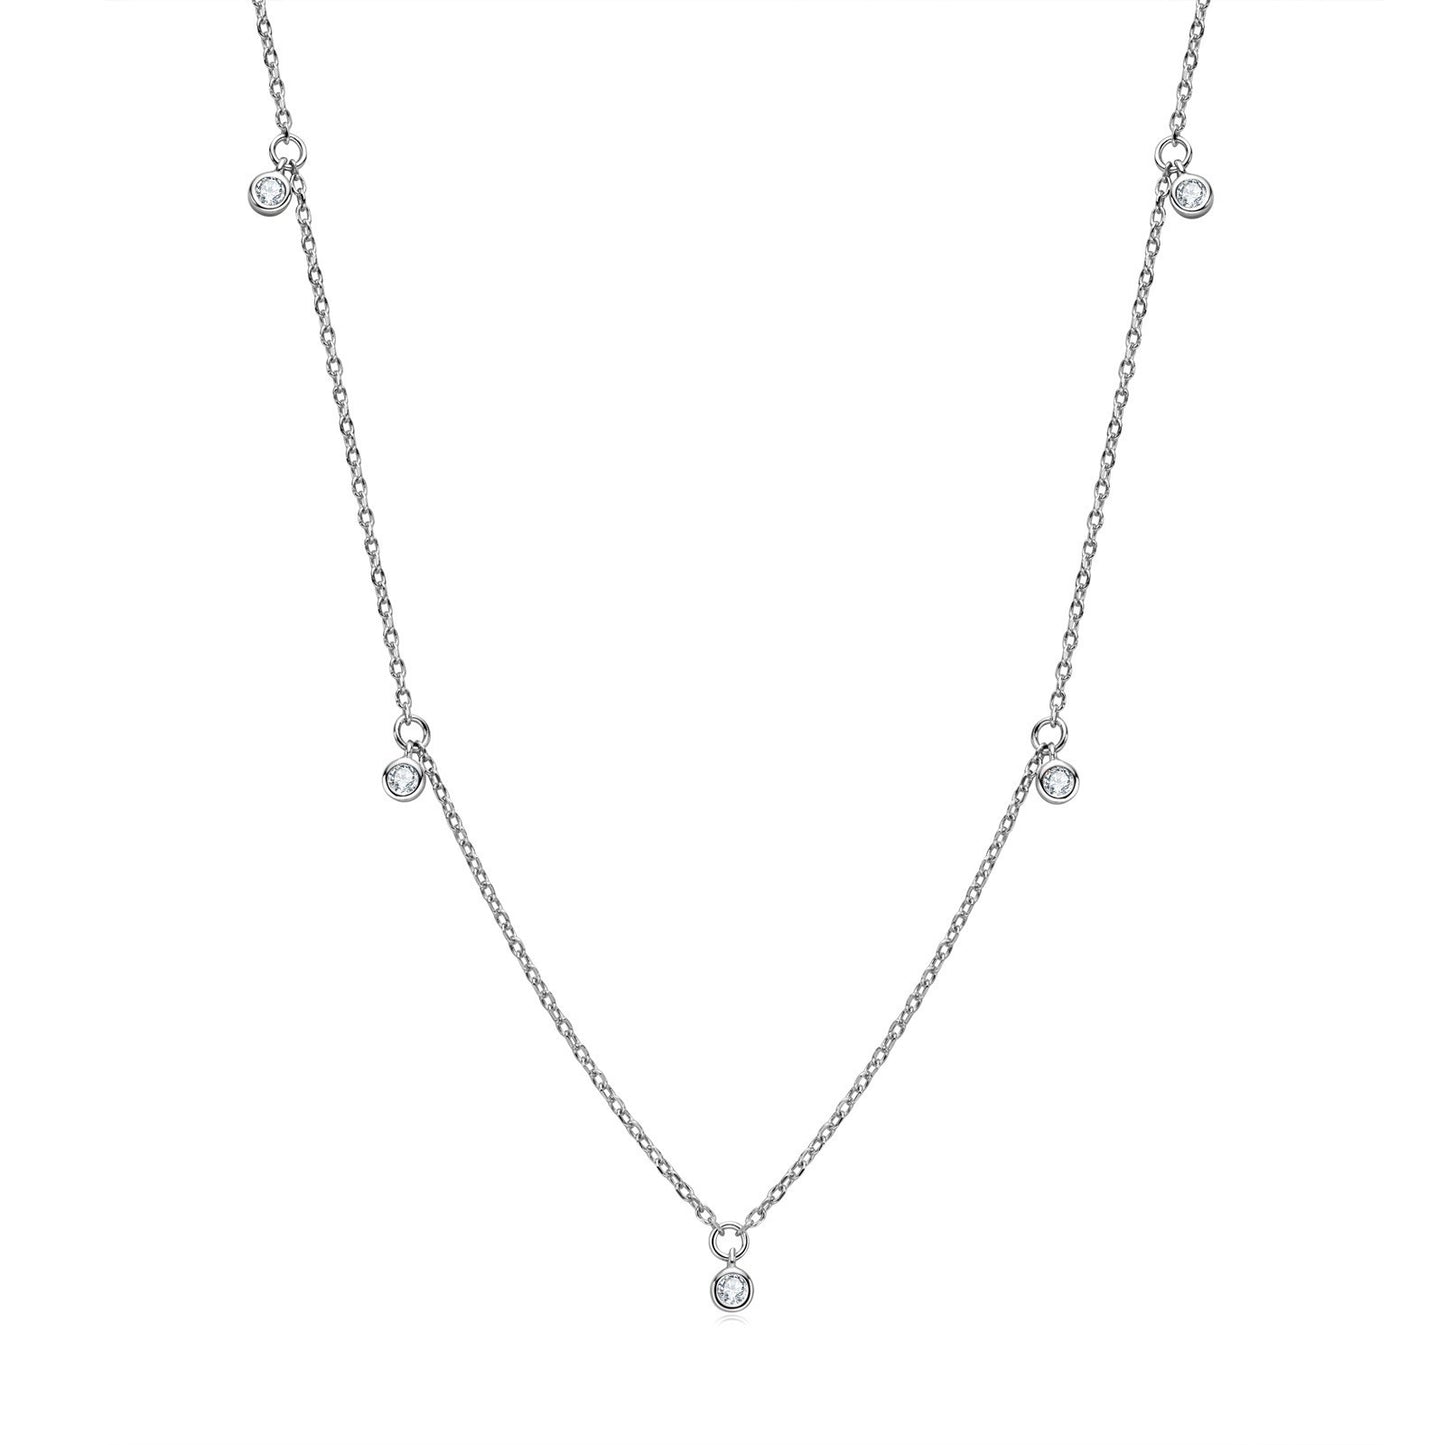 S925 Sterling Silver Starry Clavicle Chain